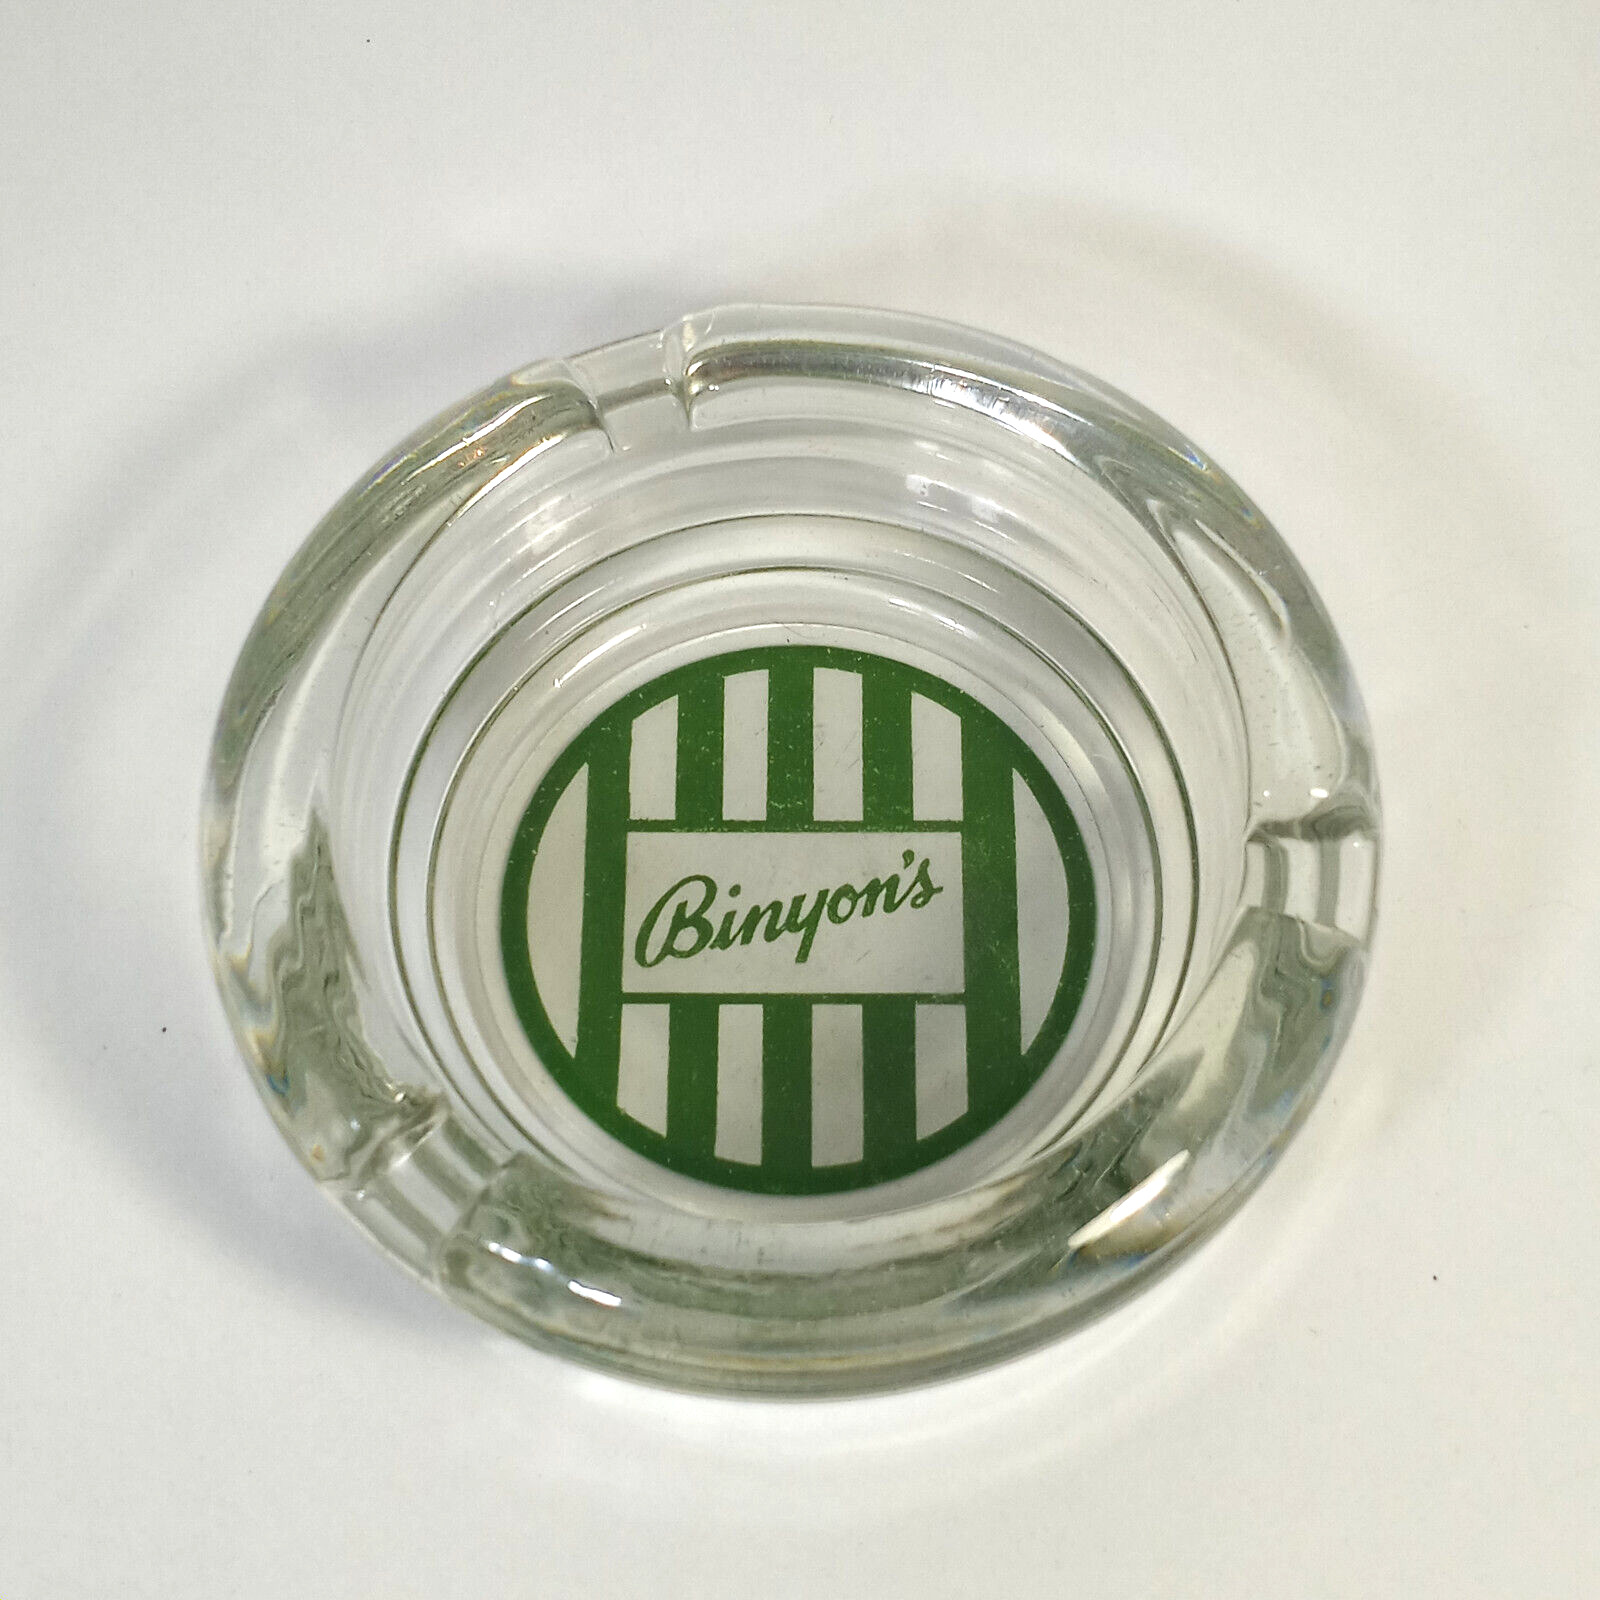 Vintage Binion\'s Clear Round Ashtray The One not in the gift Shops.